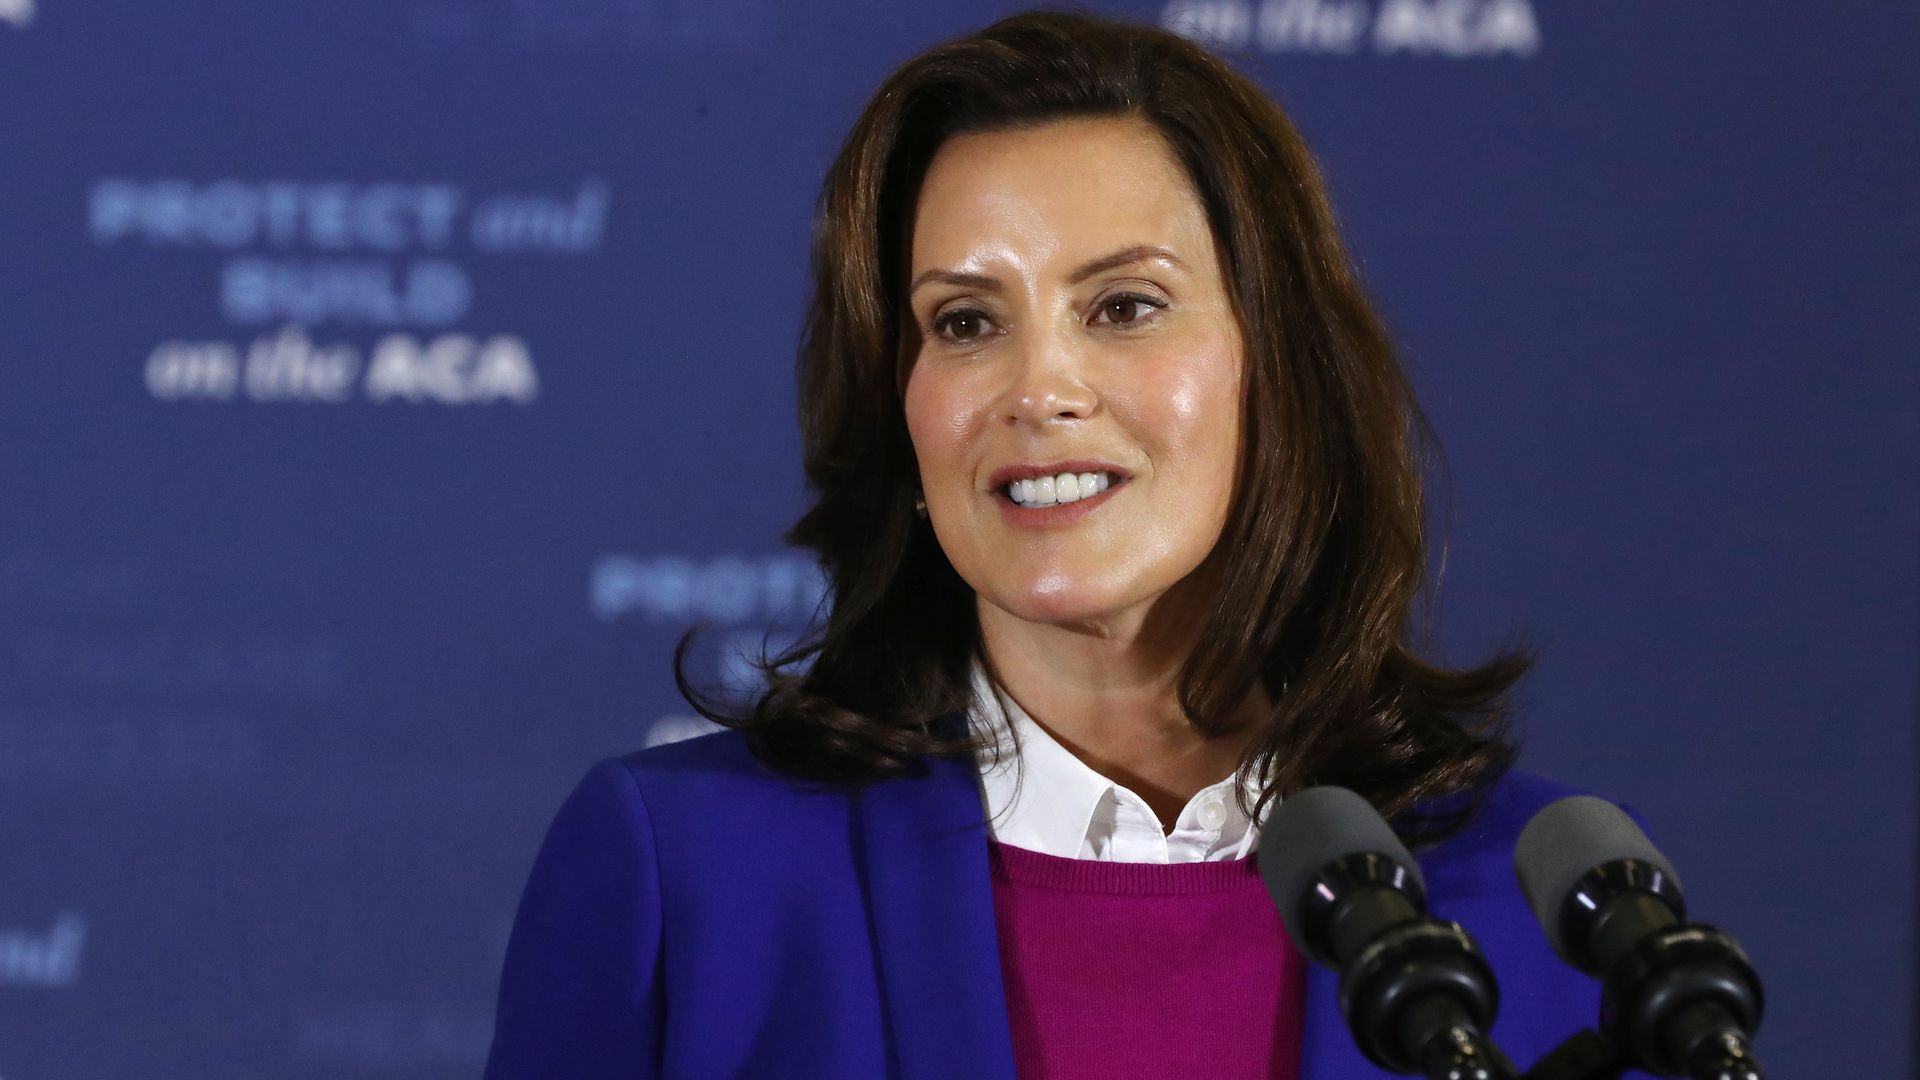 Gretchen Whitmer delivers remarks about health care at Beech Woods Recreation Center. Photo: Chip Somodevilla/Getty Images